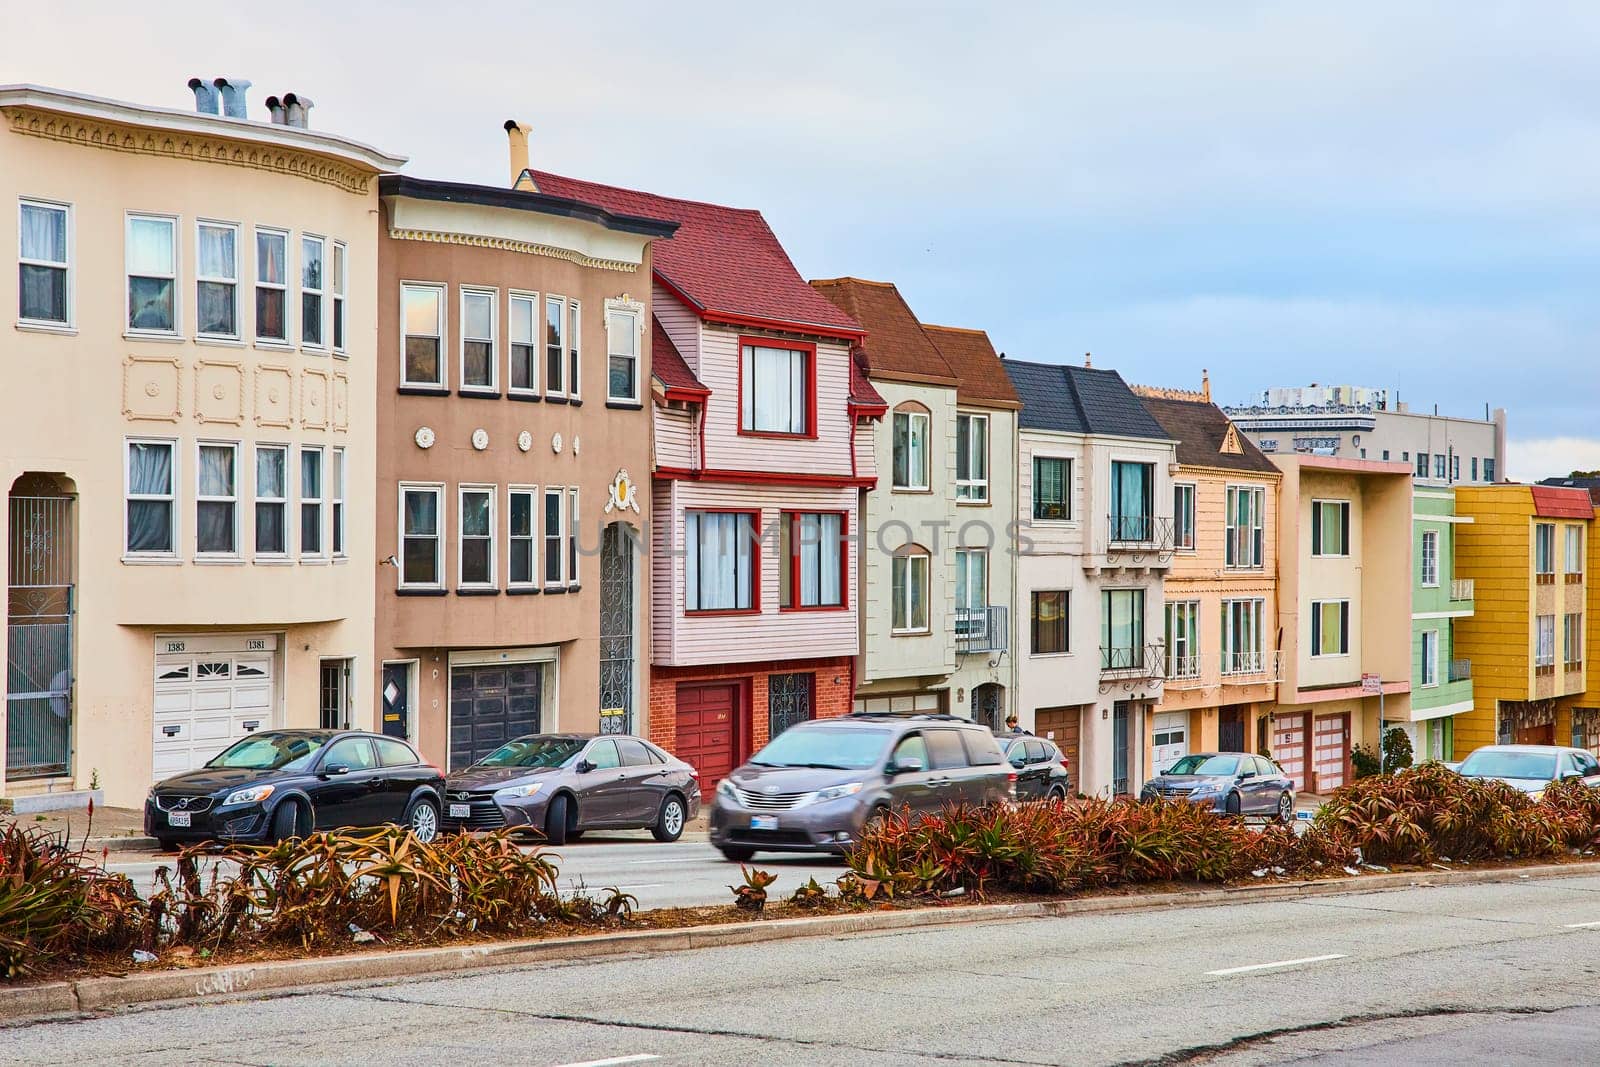 Image of Colorful row of San Francisco houses in compact housing with vehicles on street